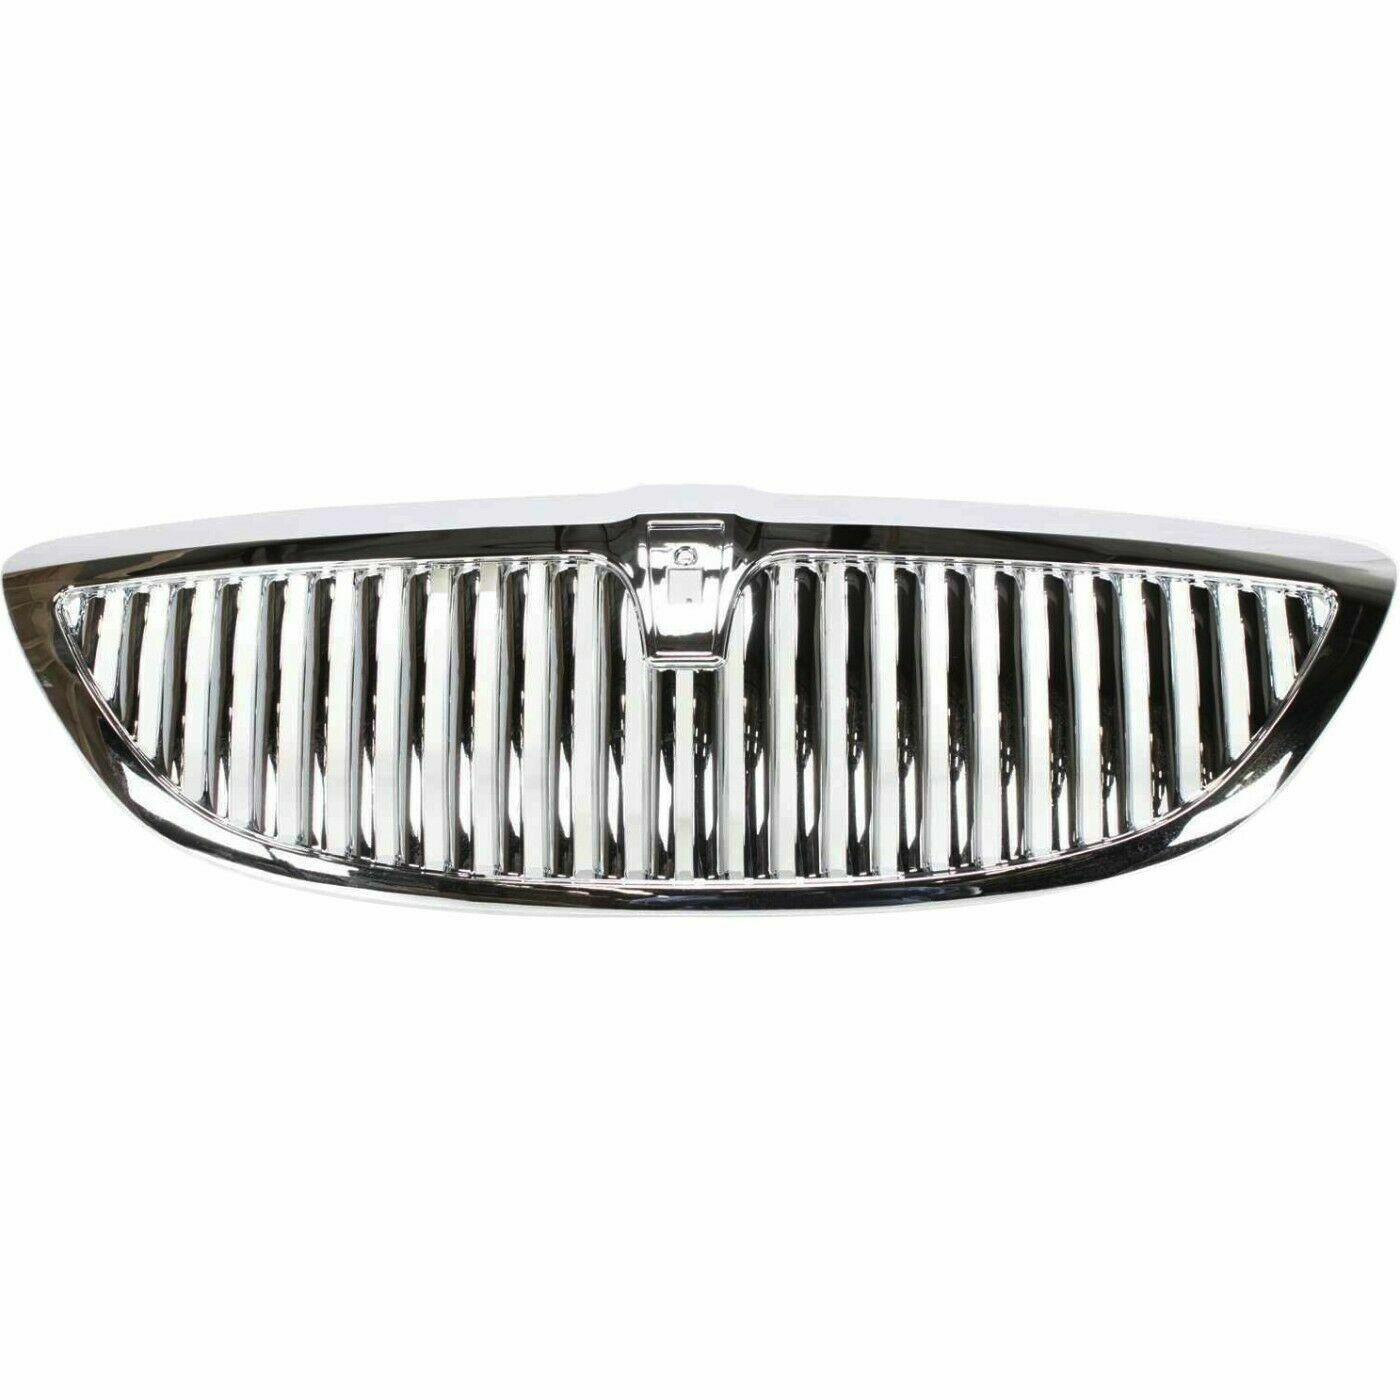 NEW Chrome Grille For 2003-2011 Lincoln Town Car FO1200403 SHIPS TODAY